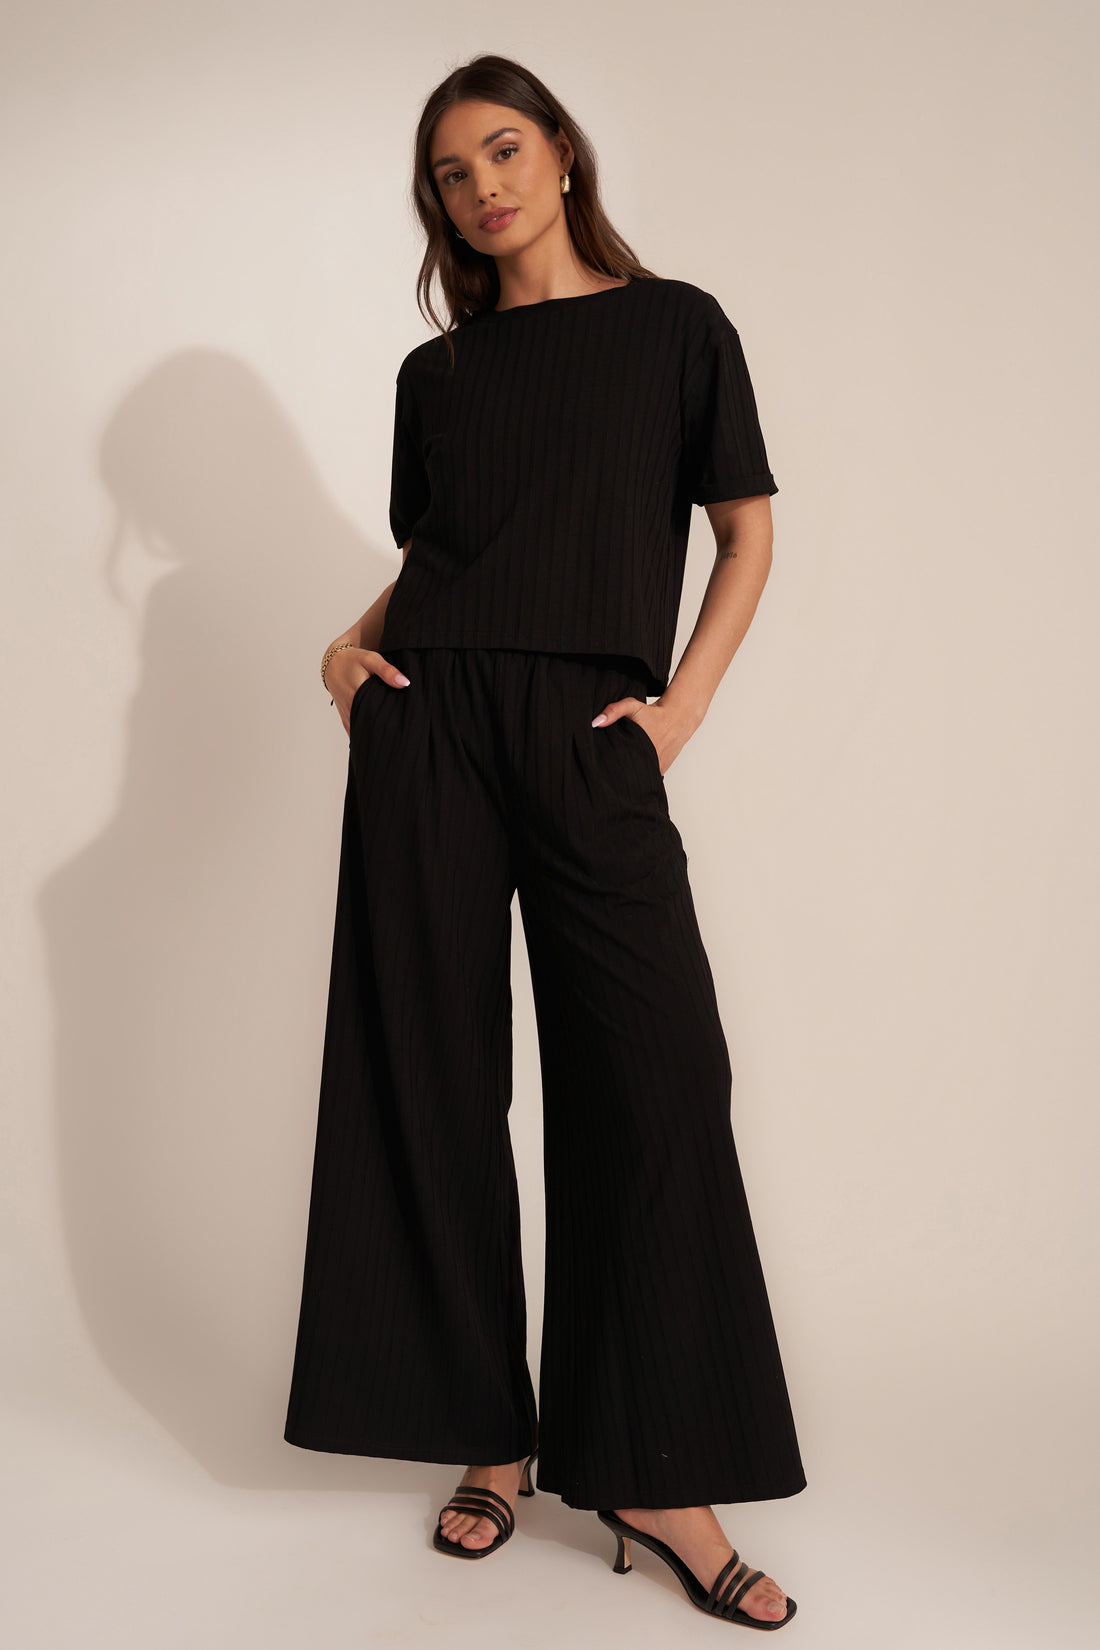 The Everyday Pant - Black